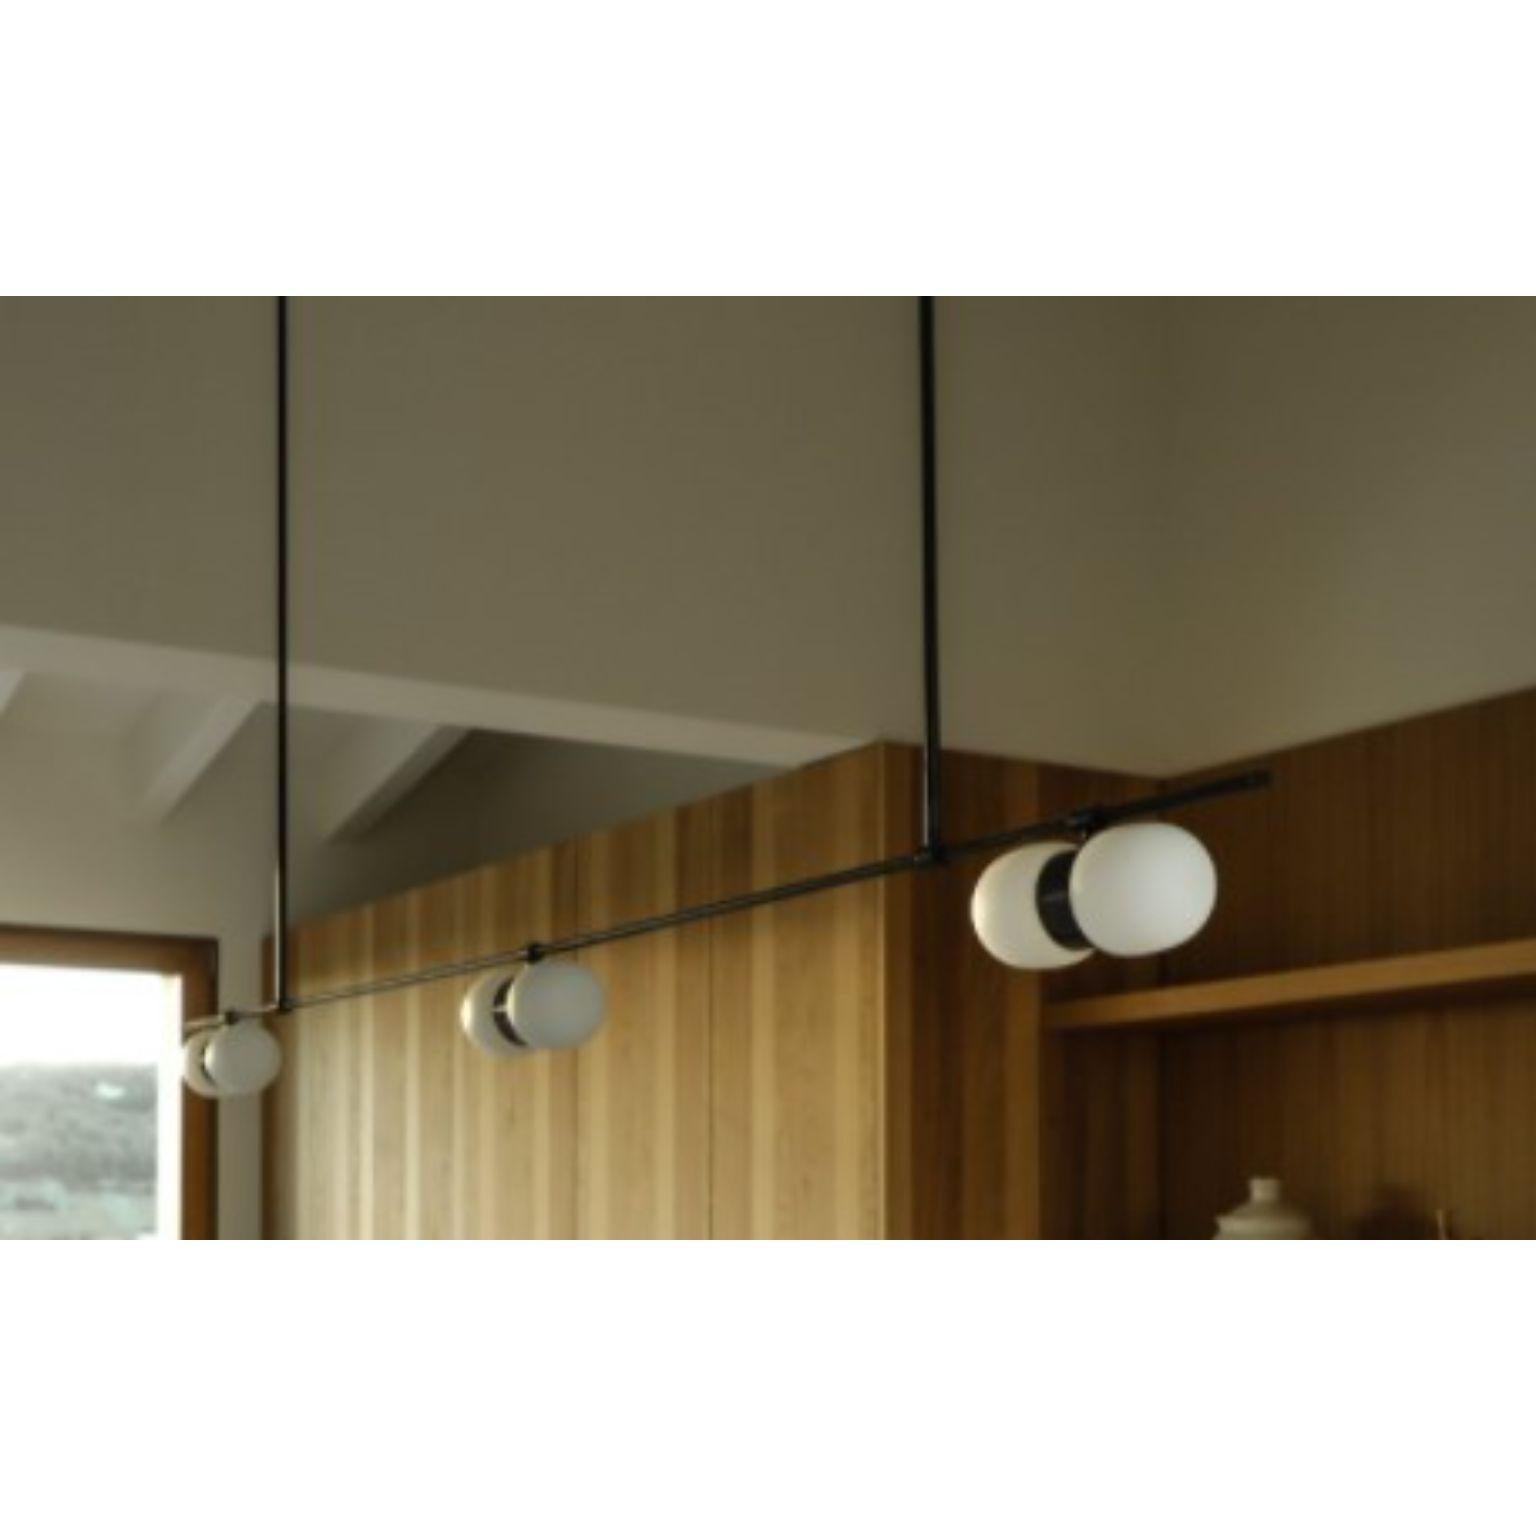 Nuvol chandelier Hilo Horizontal by Contain
Dimensions: D290 x H23 x H100 cm (Customizable dimensions)
Materials: Brass structure and matte or glossy glass.
Available in different finishes and dimensions.

All our lamps can be wired according